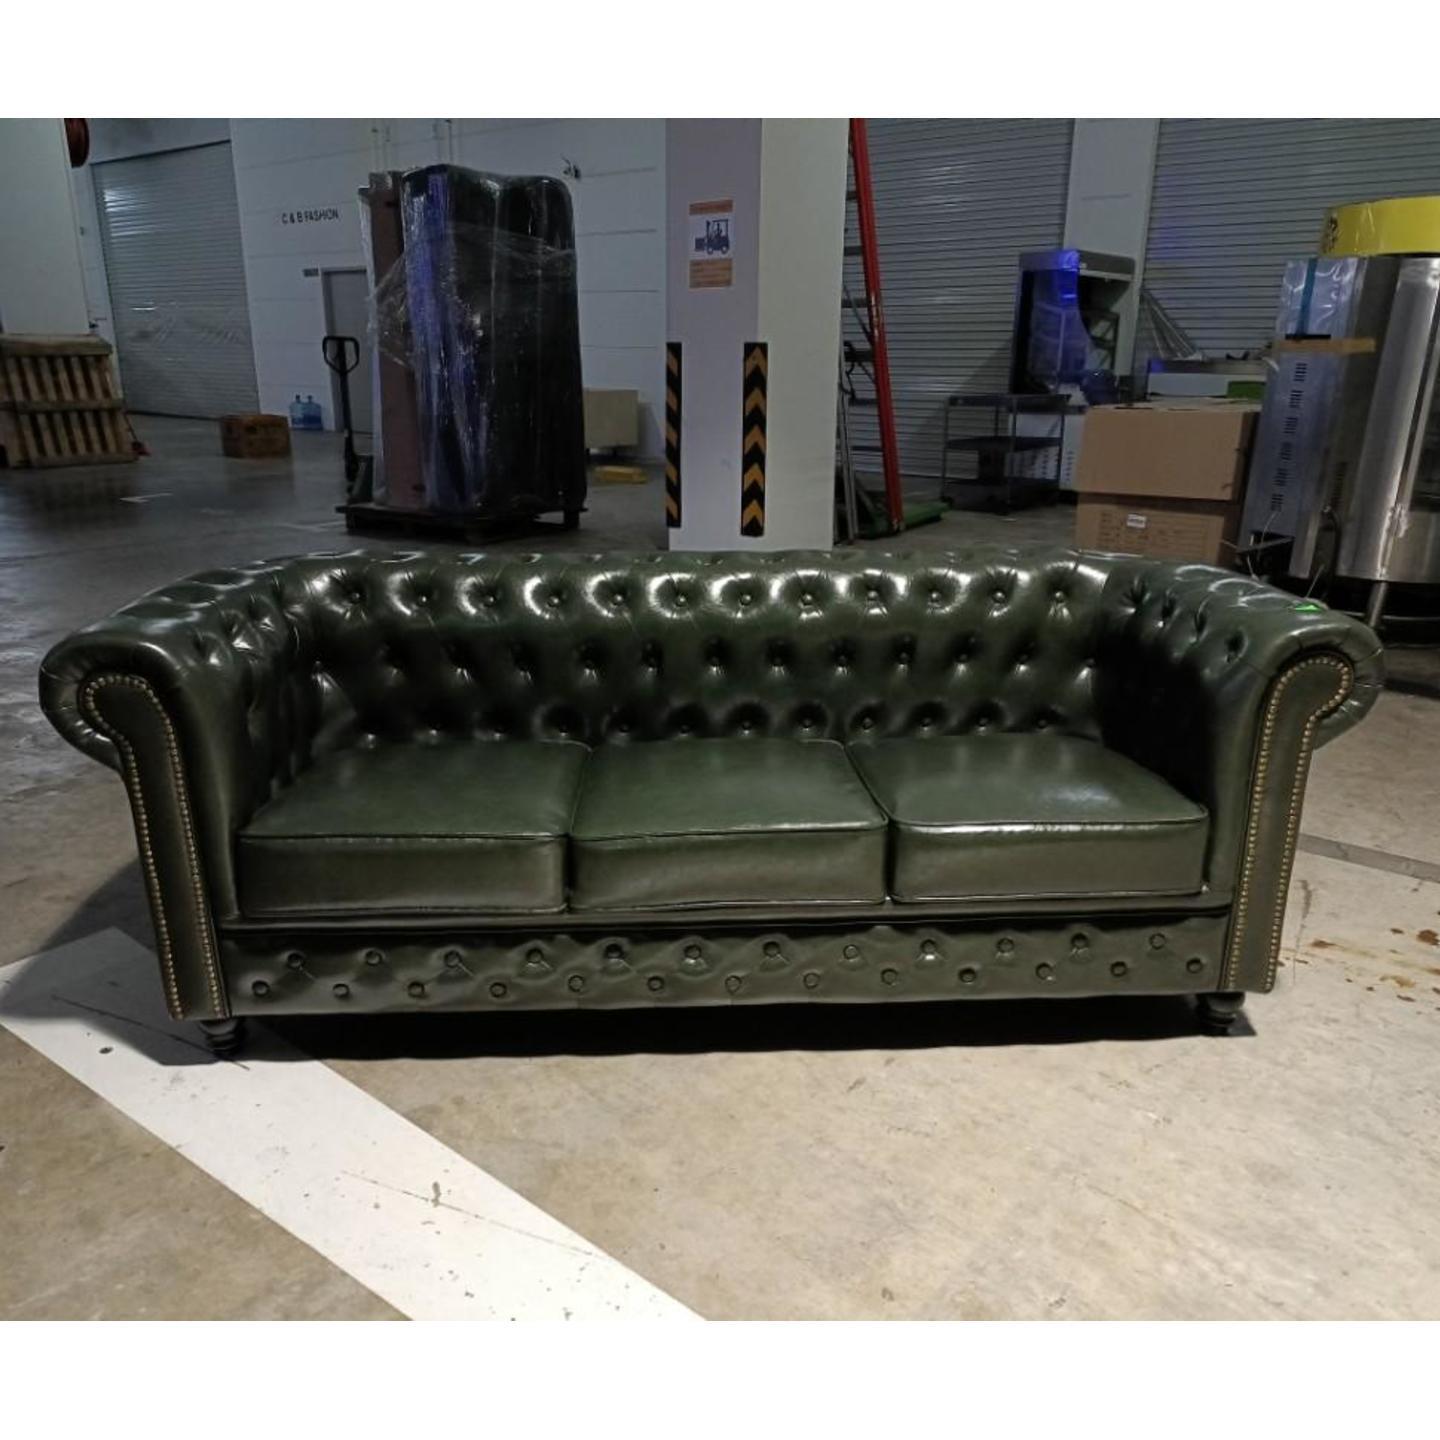 PRE-ORDER SALVADORE X 3 Seater Chesterfield Sofa in EMERALD GREEN PUB- Delivery Early Nov 21